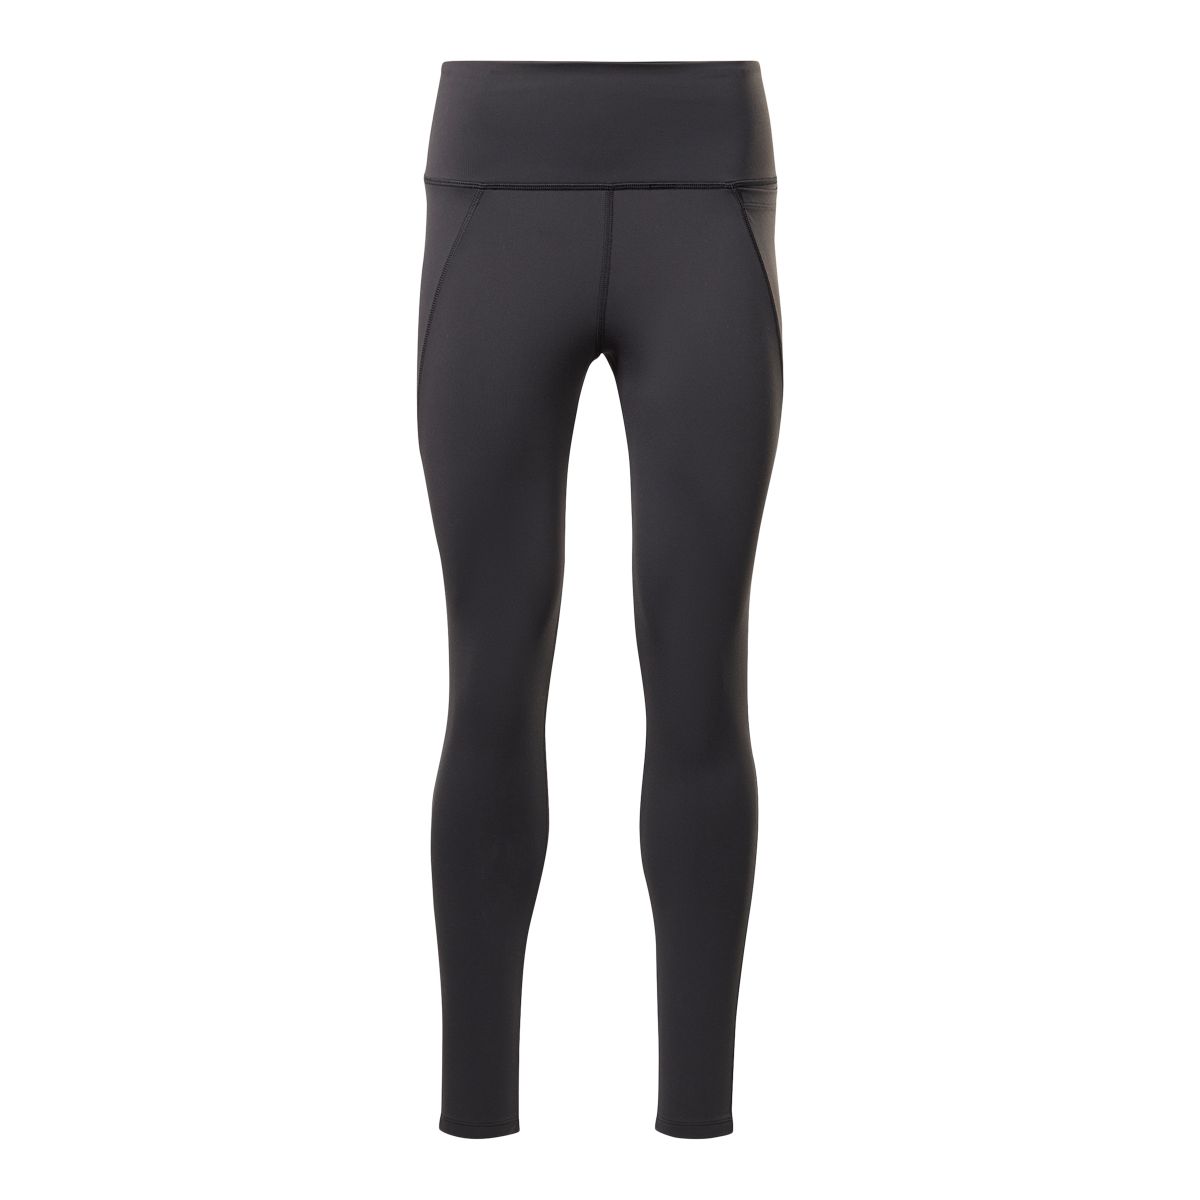 Womens Leggings & Tights: High-Performance and Comfort – tasc